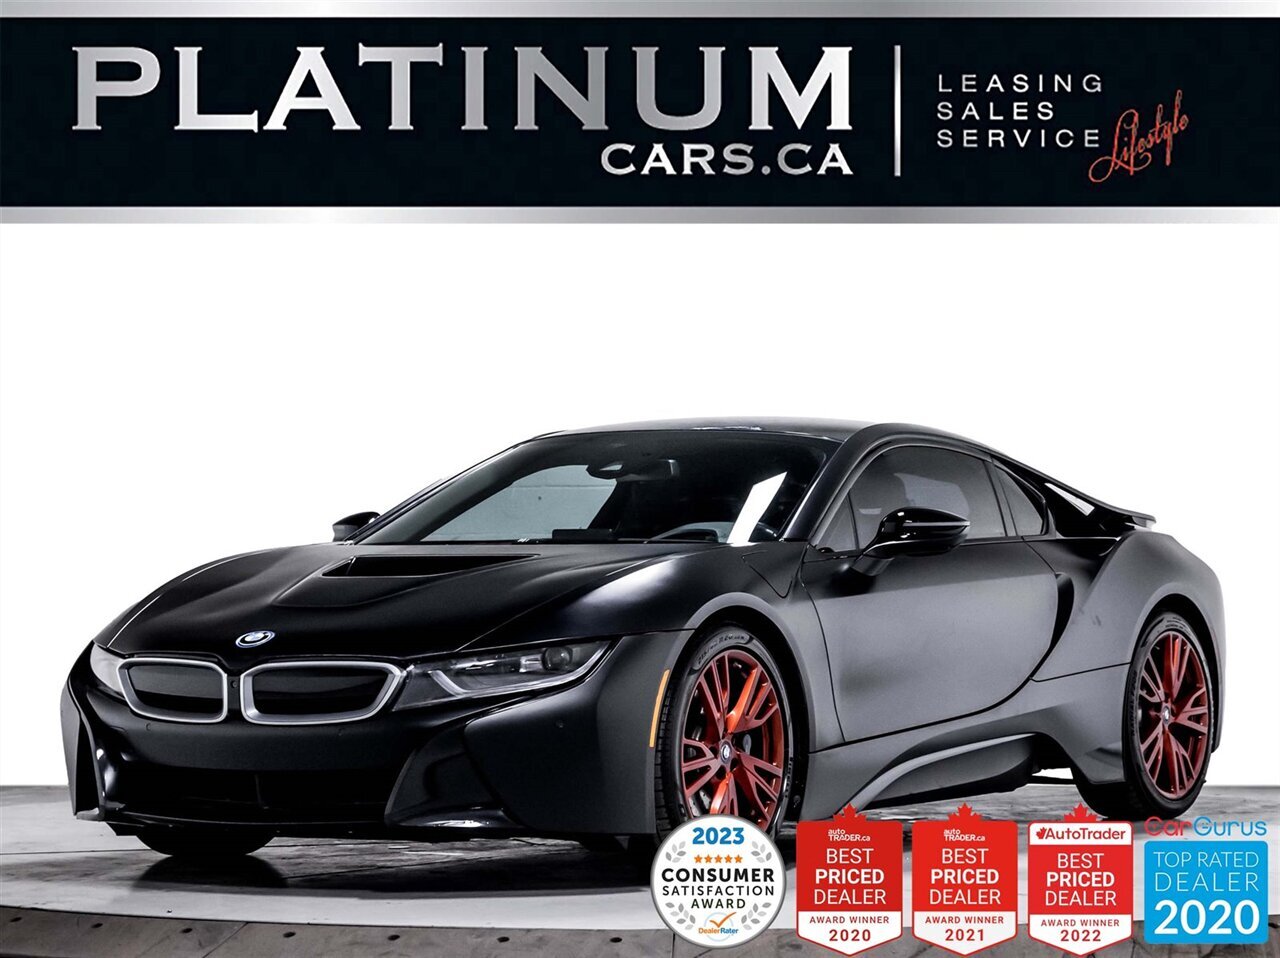 2017 Bmw I8 Protonic Frozen Black Edition, Carbon Chassis, Pdc - North York